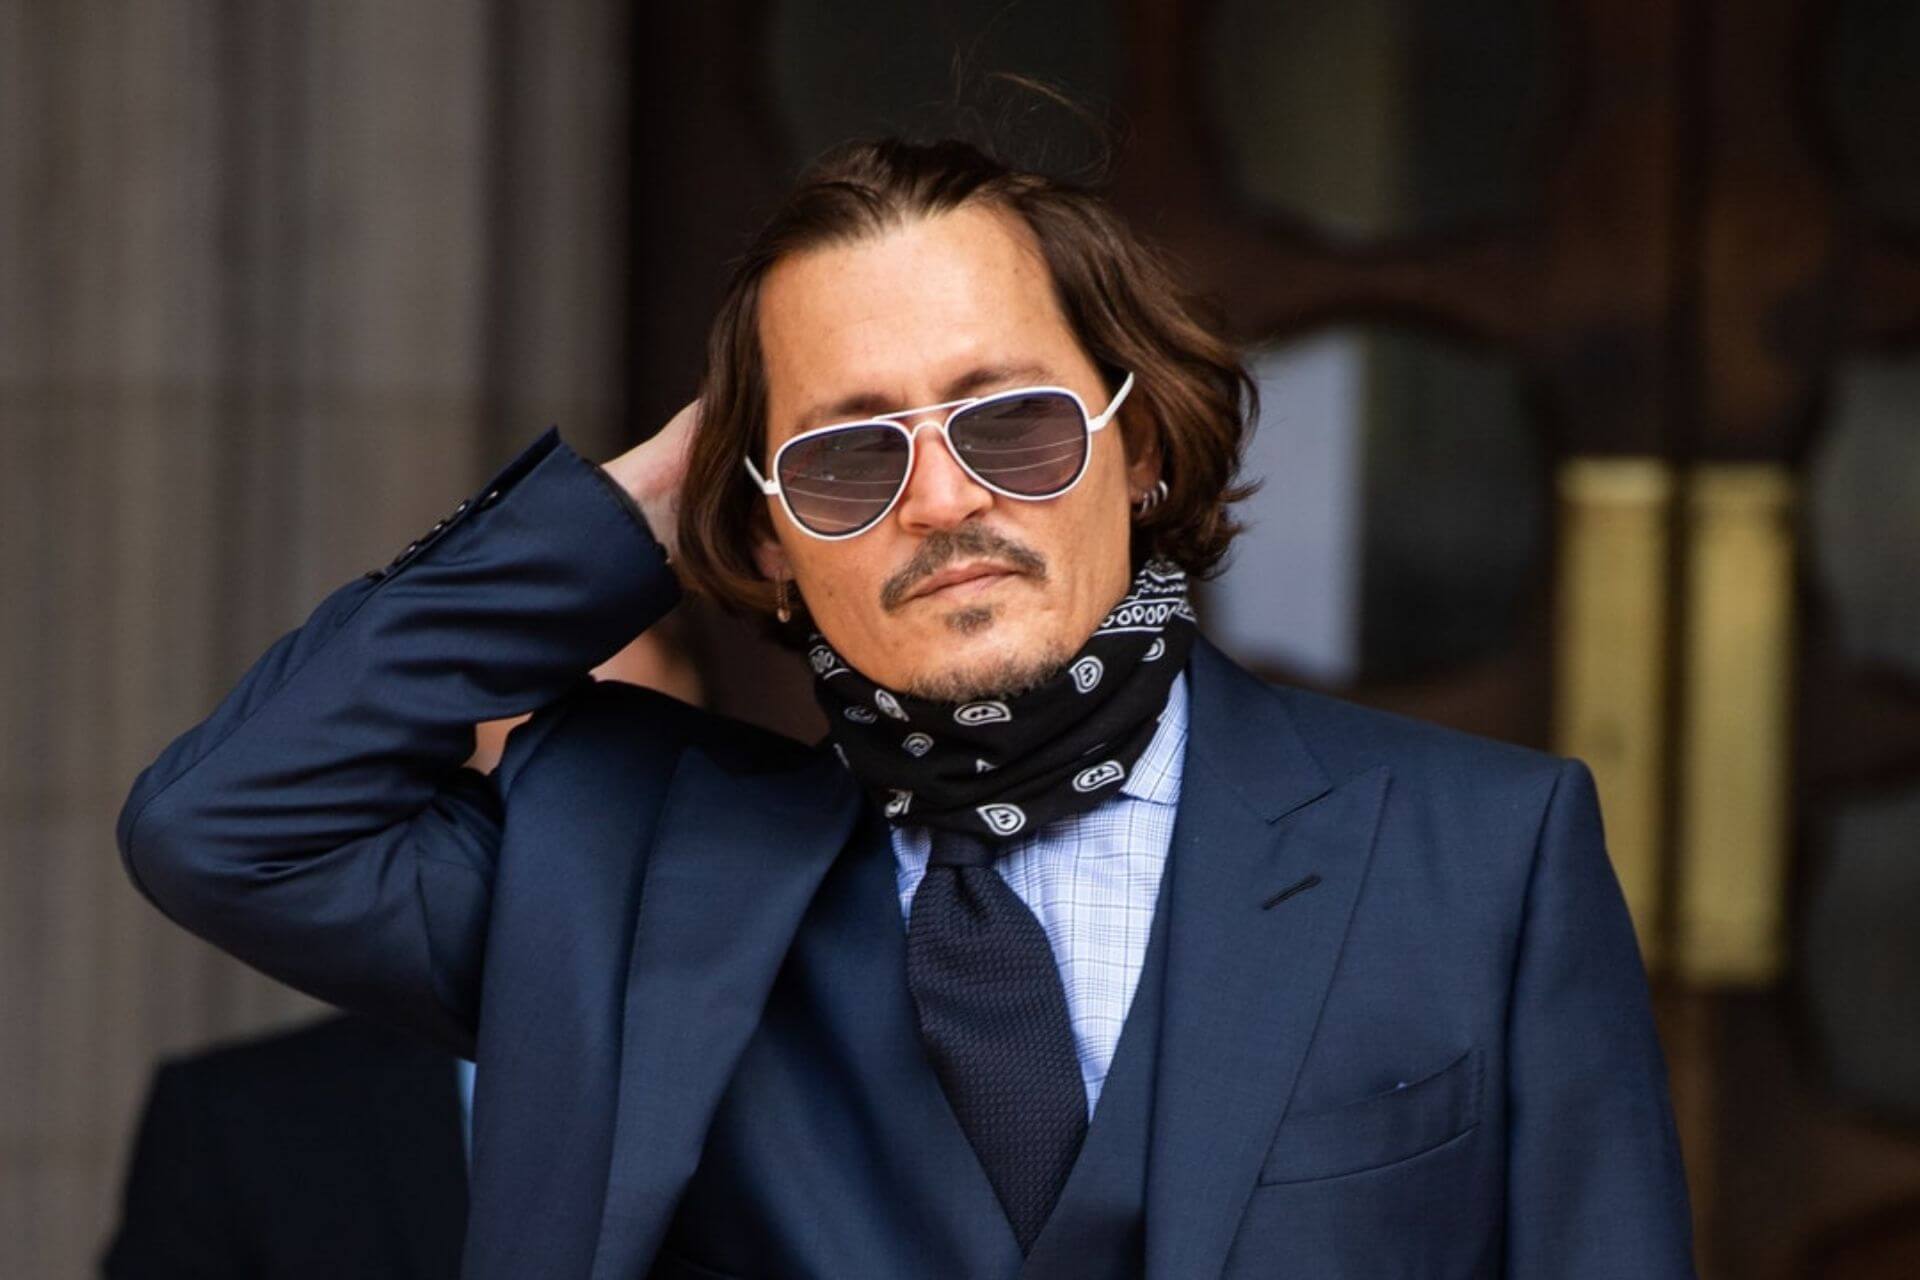 Johnny Depp thanks fans for support in ongoing defamation case against Amber Heard